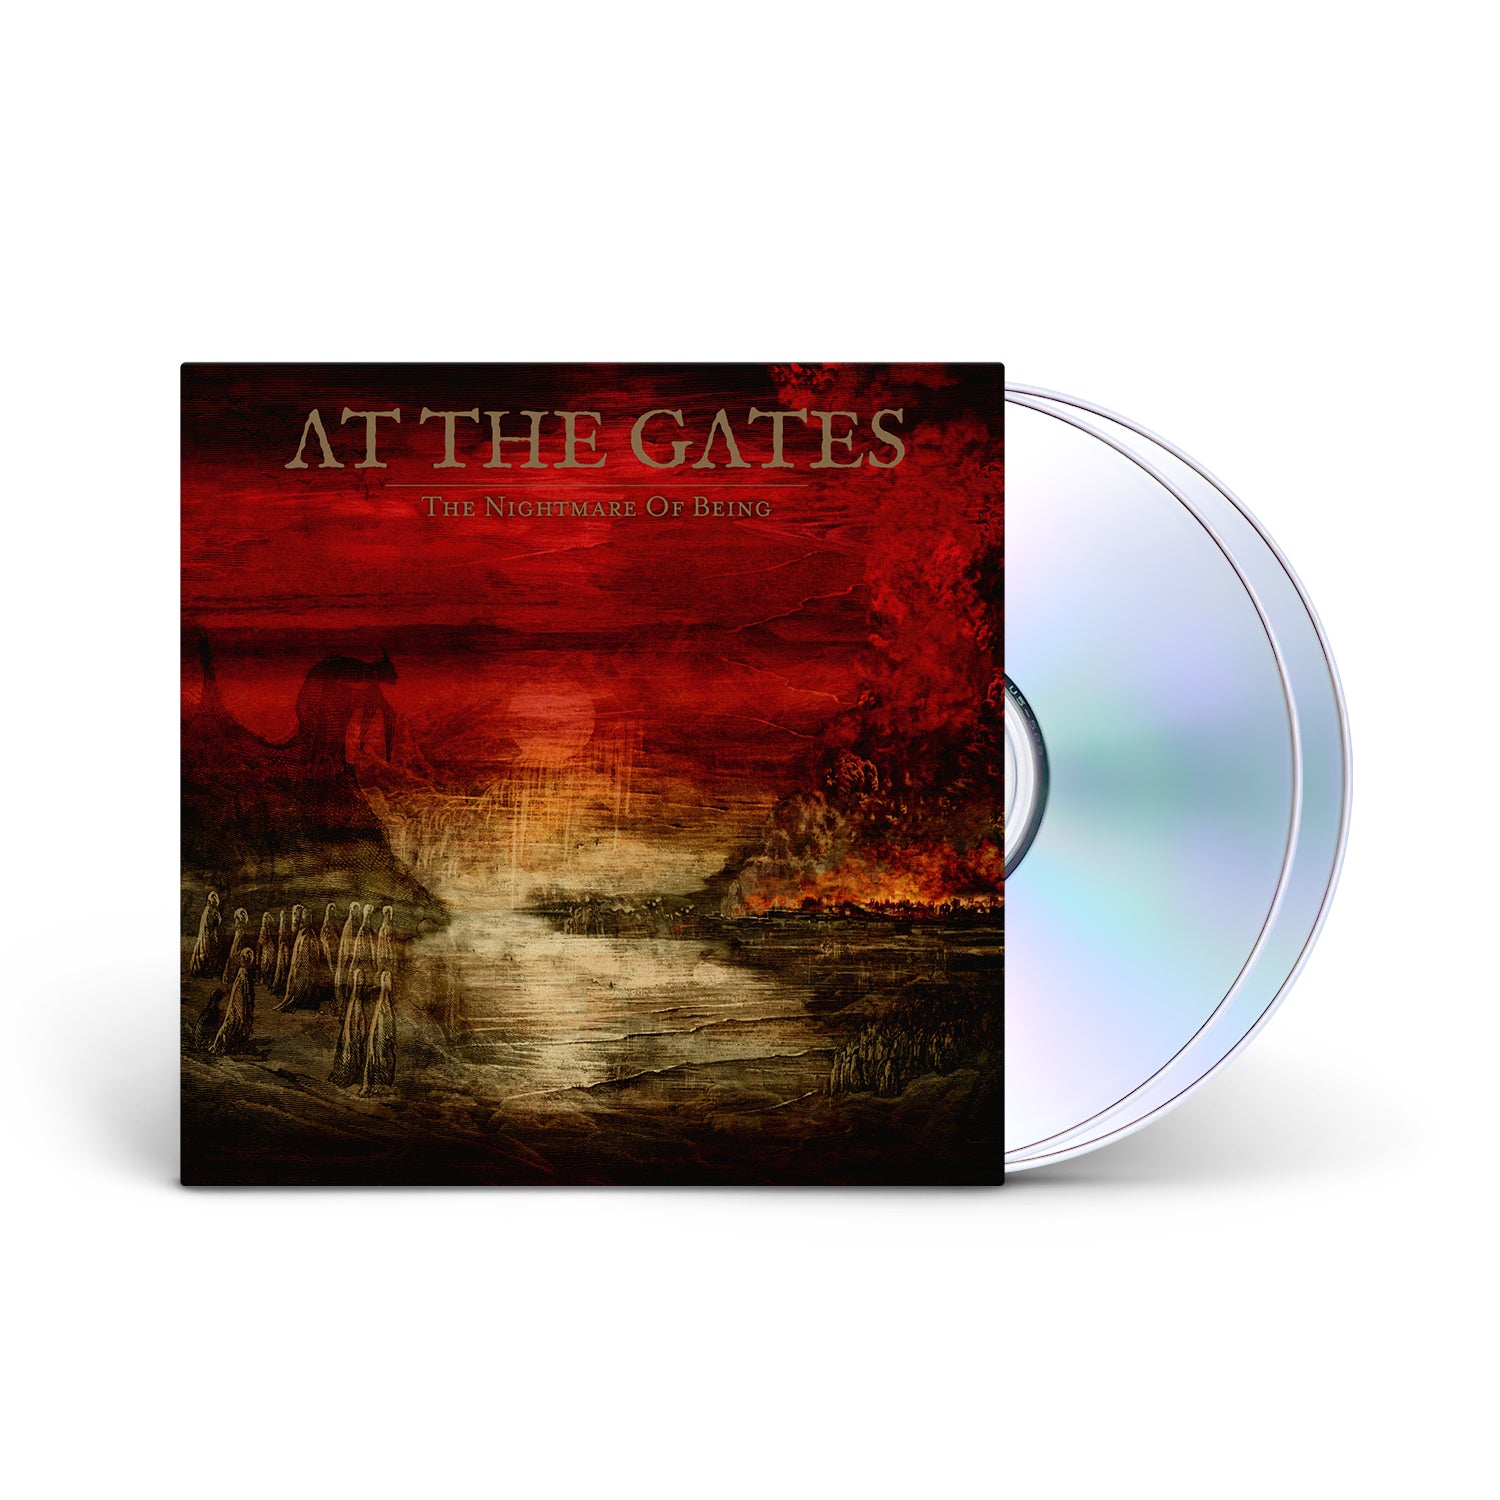 AT THE GATES - The Nightmare Of Being - 2CD - Mediabook Edition